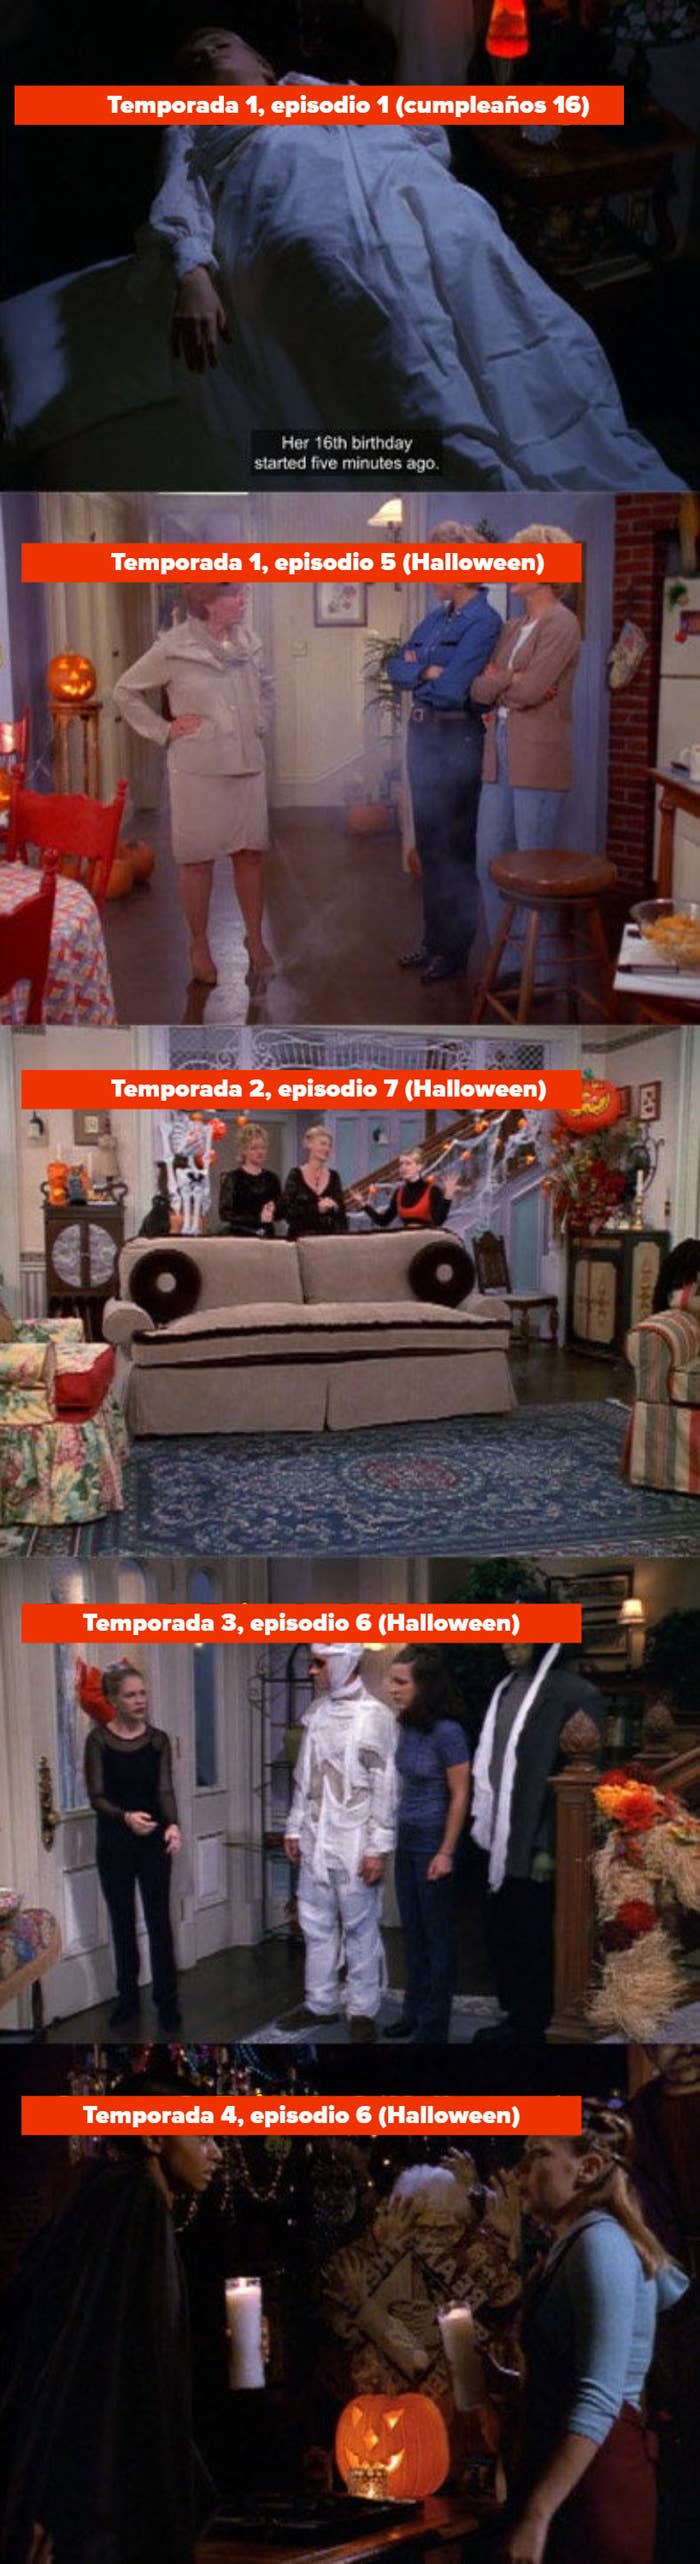 Pictures of halloween episodes from Seasons 1-4